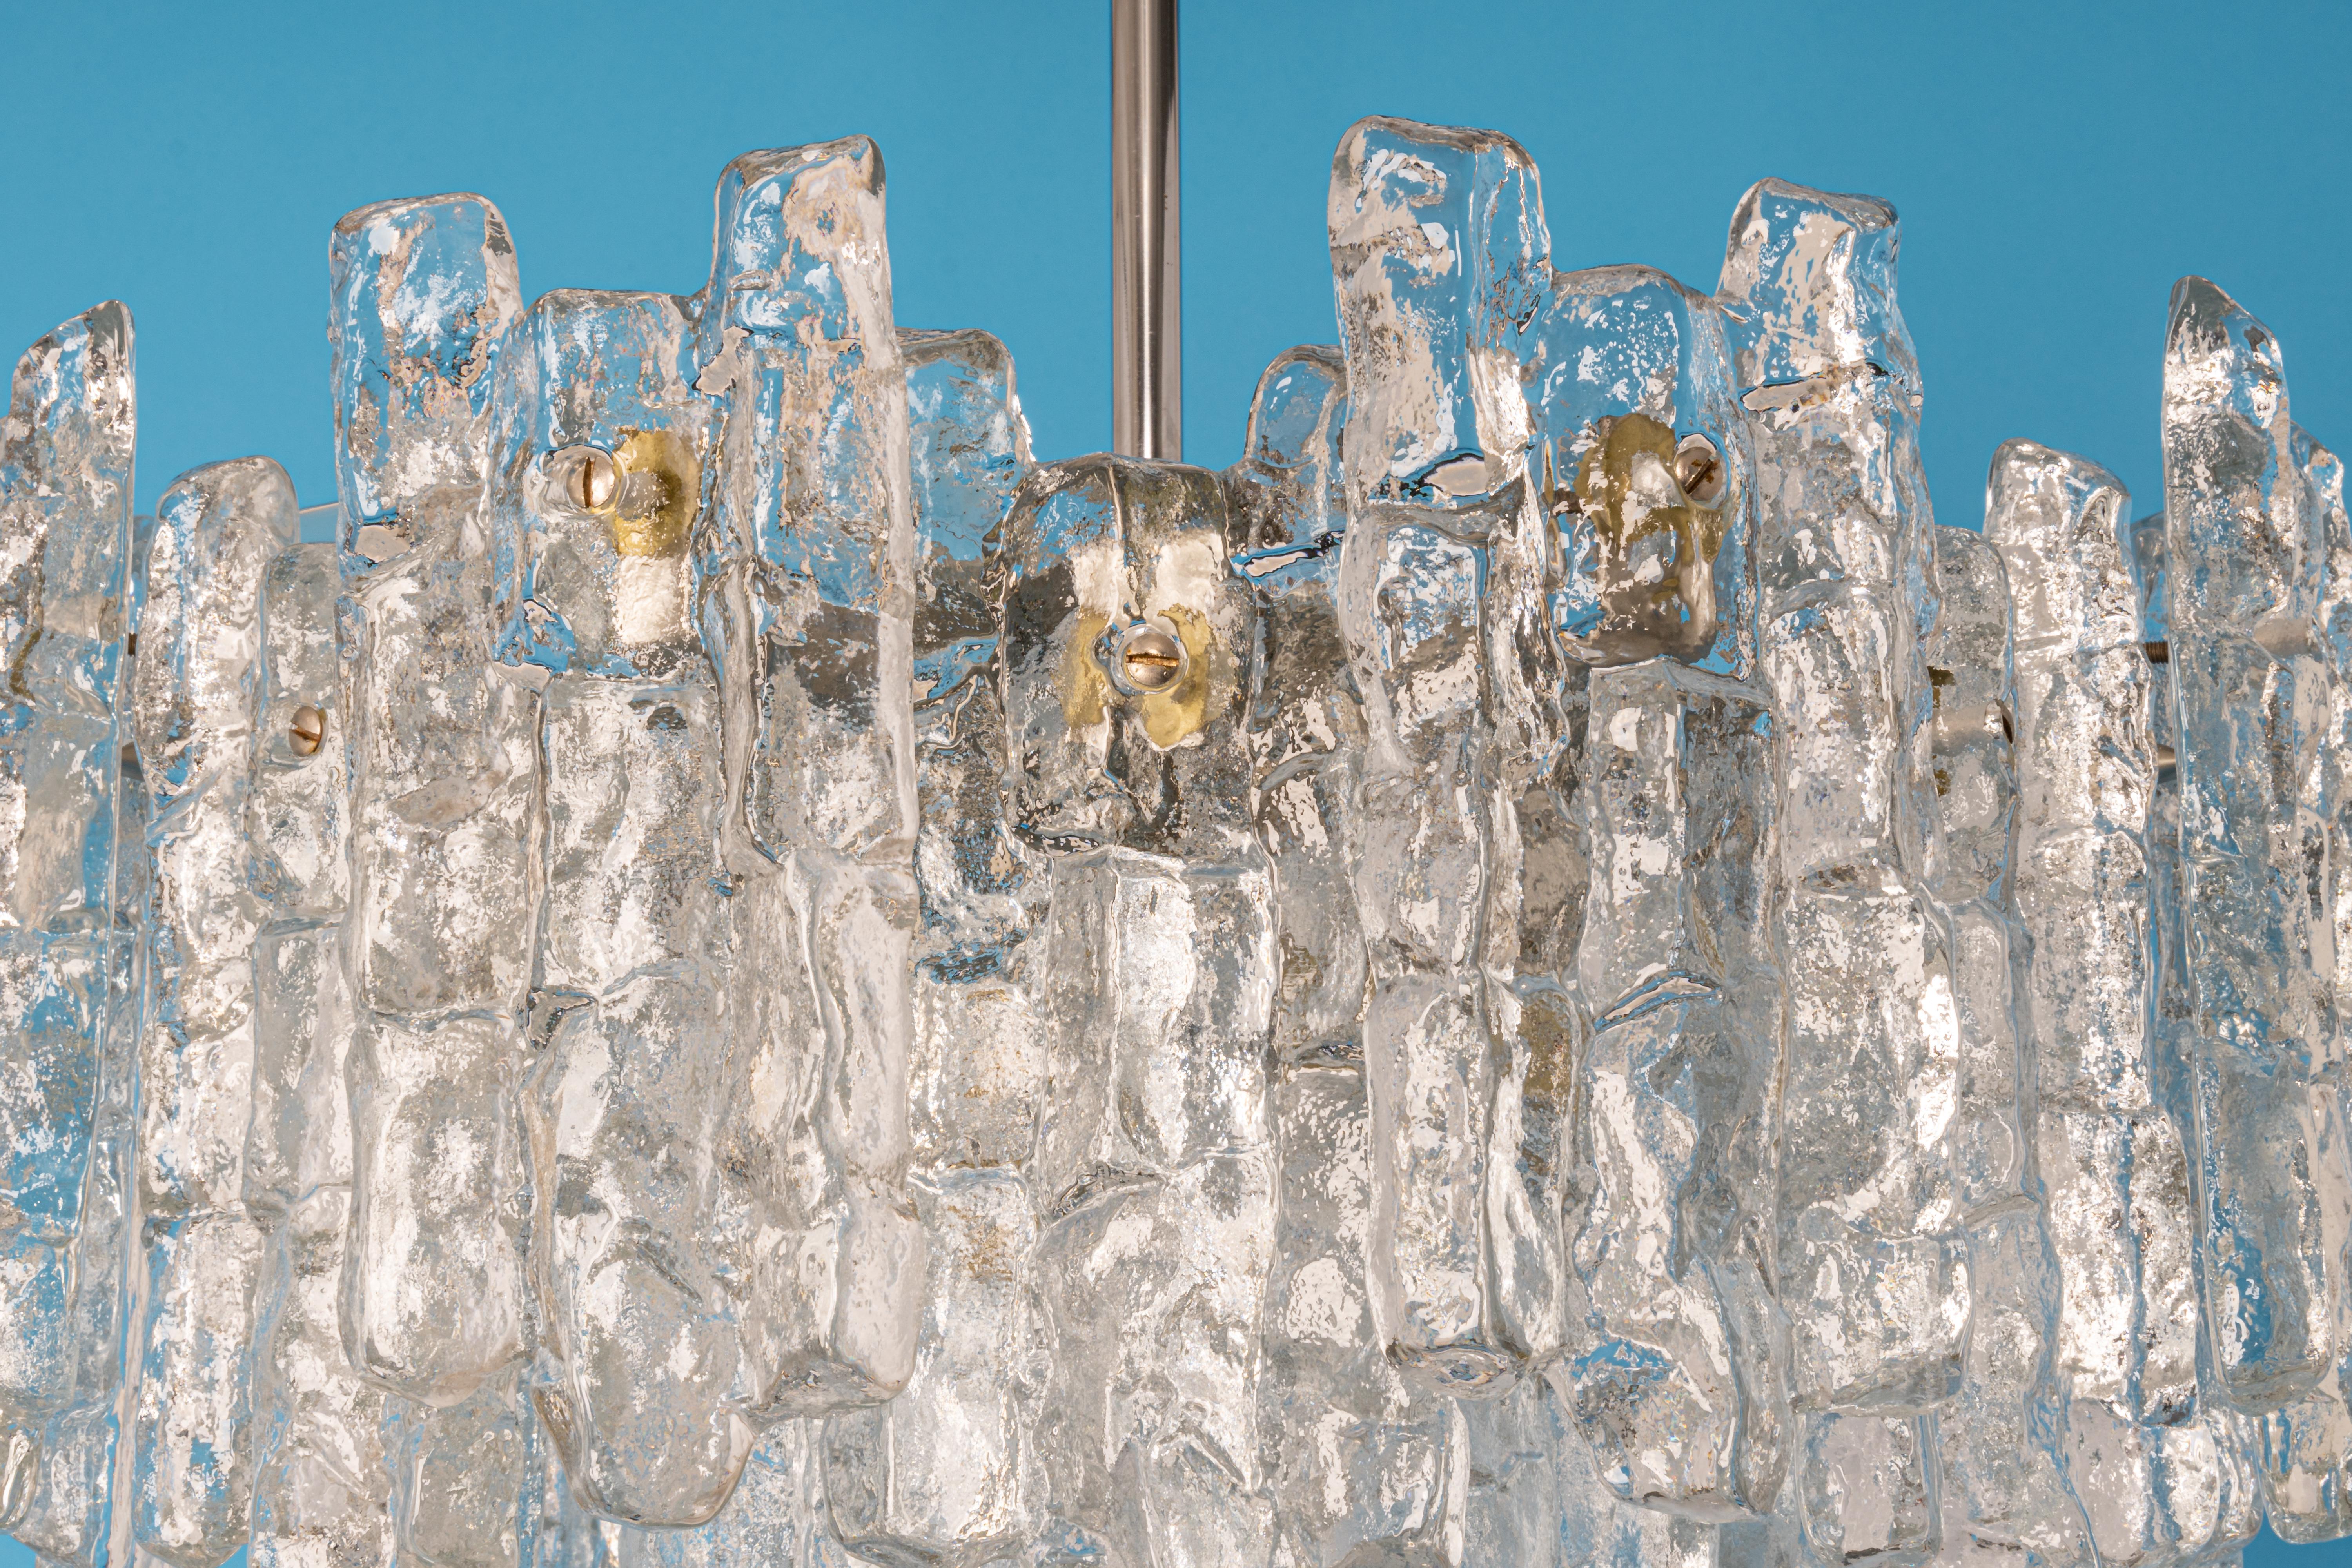 Stunning Murano glass chandelier by Kalmar, 1960s
Three tiers structure gathering 28 structured glasses, beautifully refracting the light very heavy quality.

High quality and in very good condition. Cleaned, well-wired, and ready to use. 

The